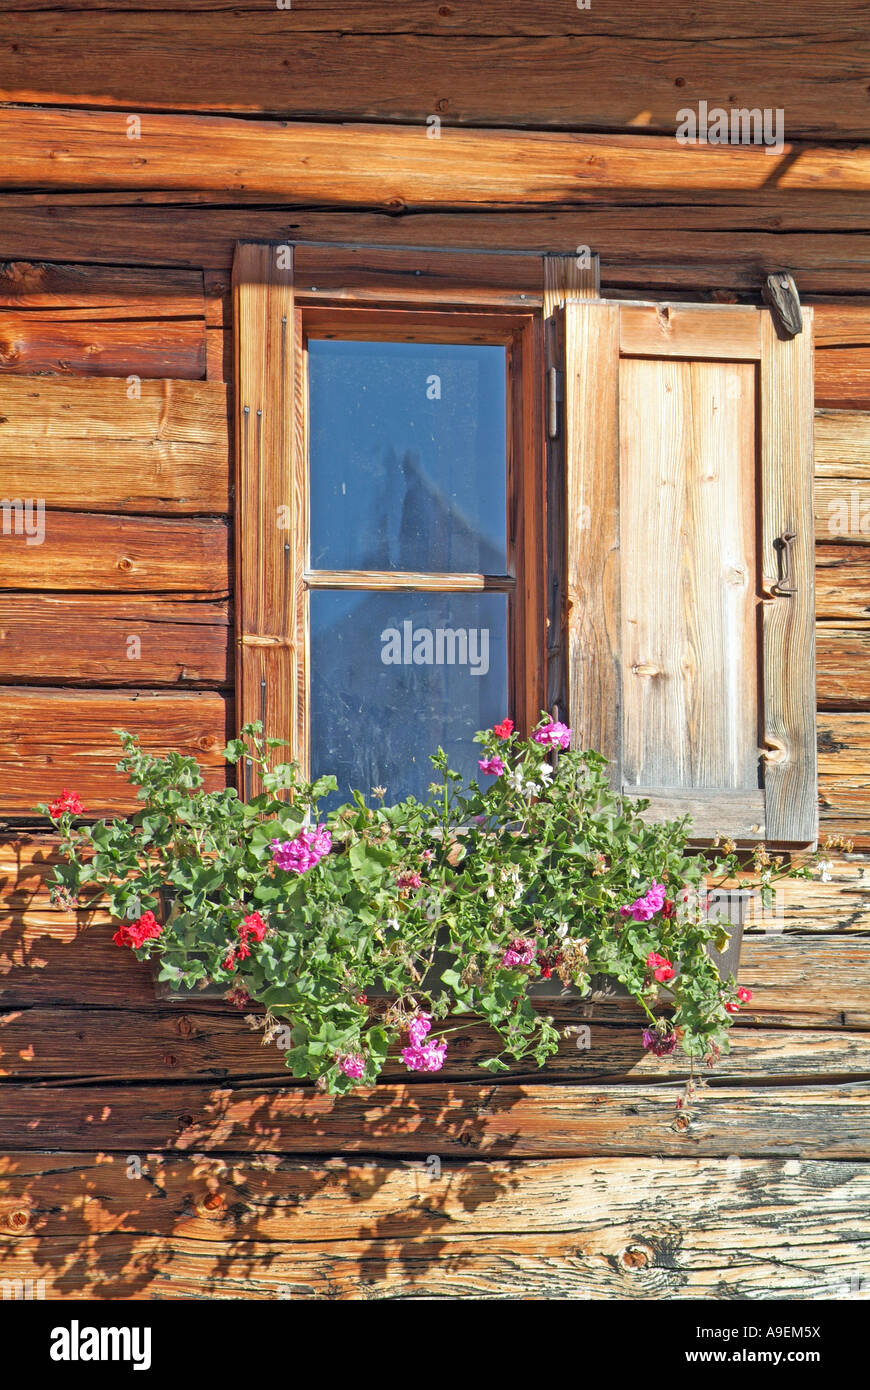 Window of a wooden alpine house decorated with Geraniums Stock Photo